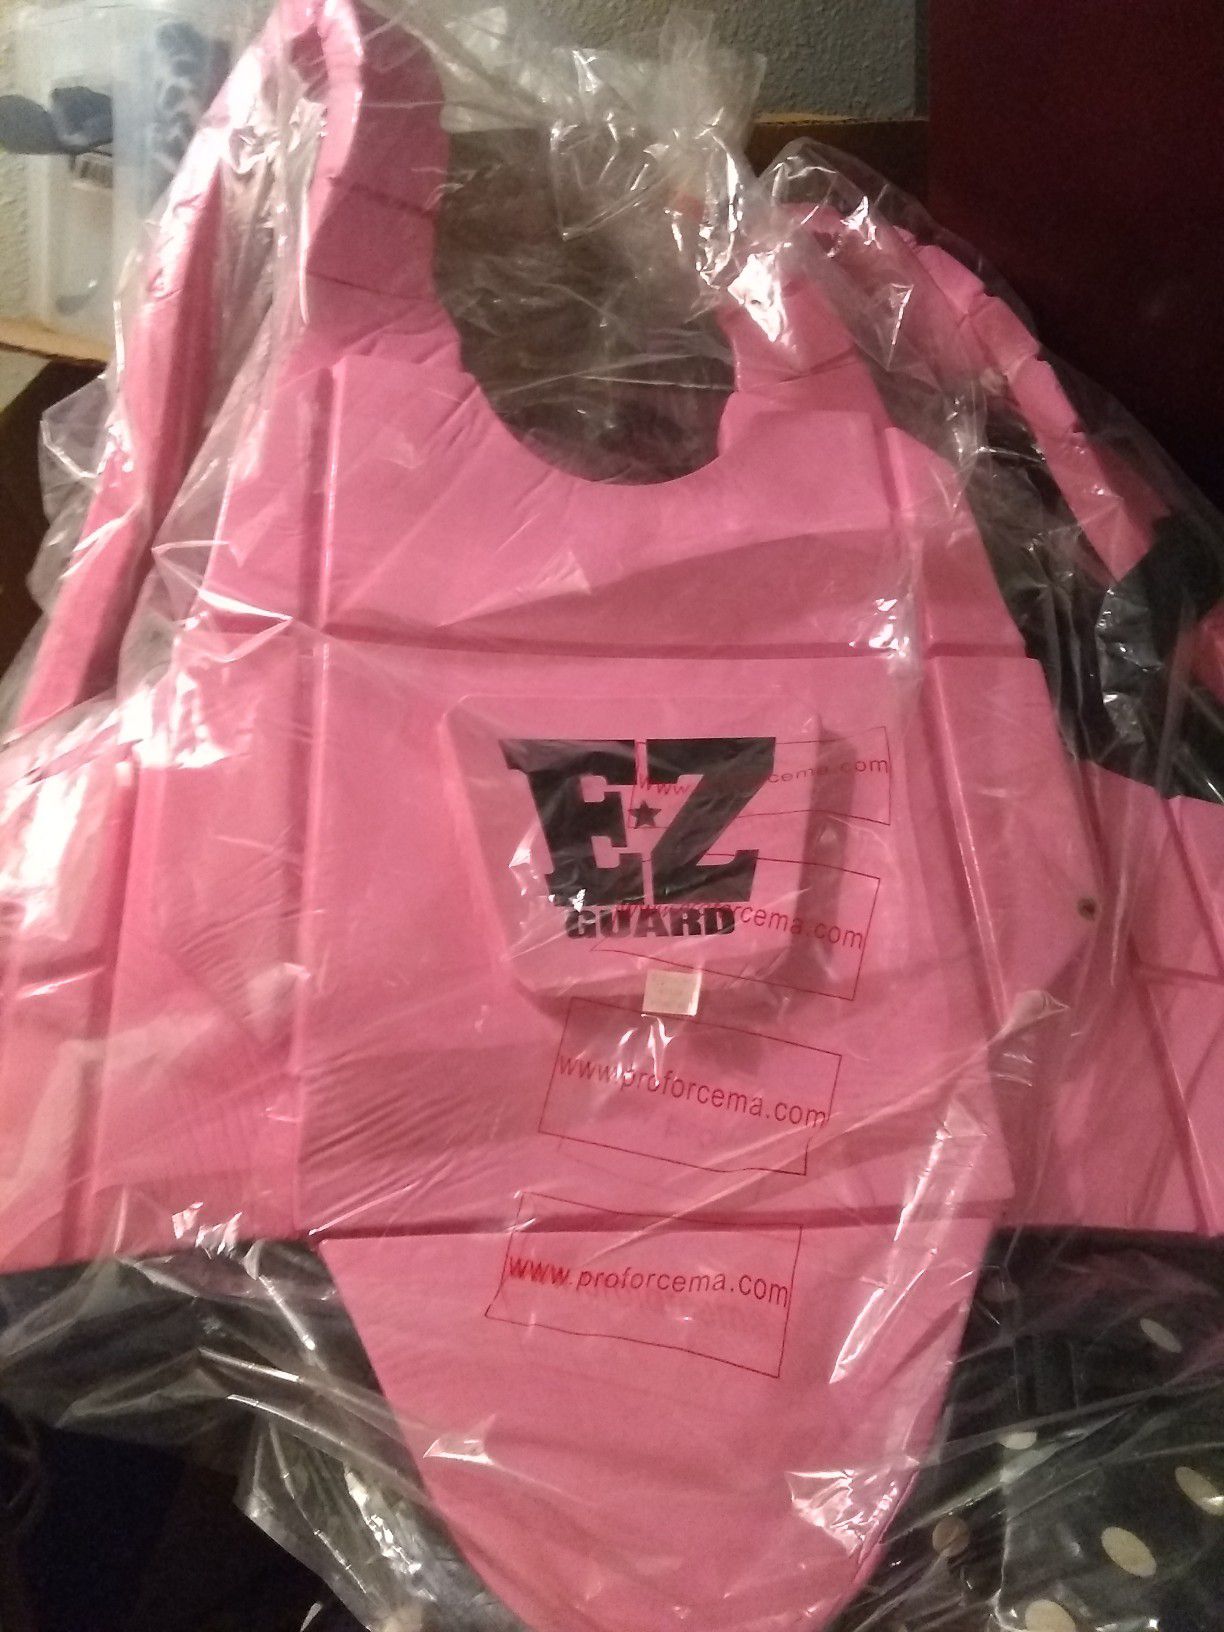 Pink Ez Guard sparring chest pad